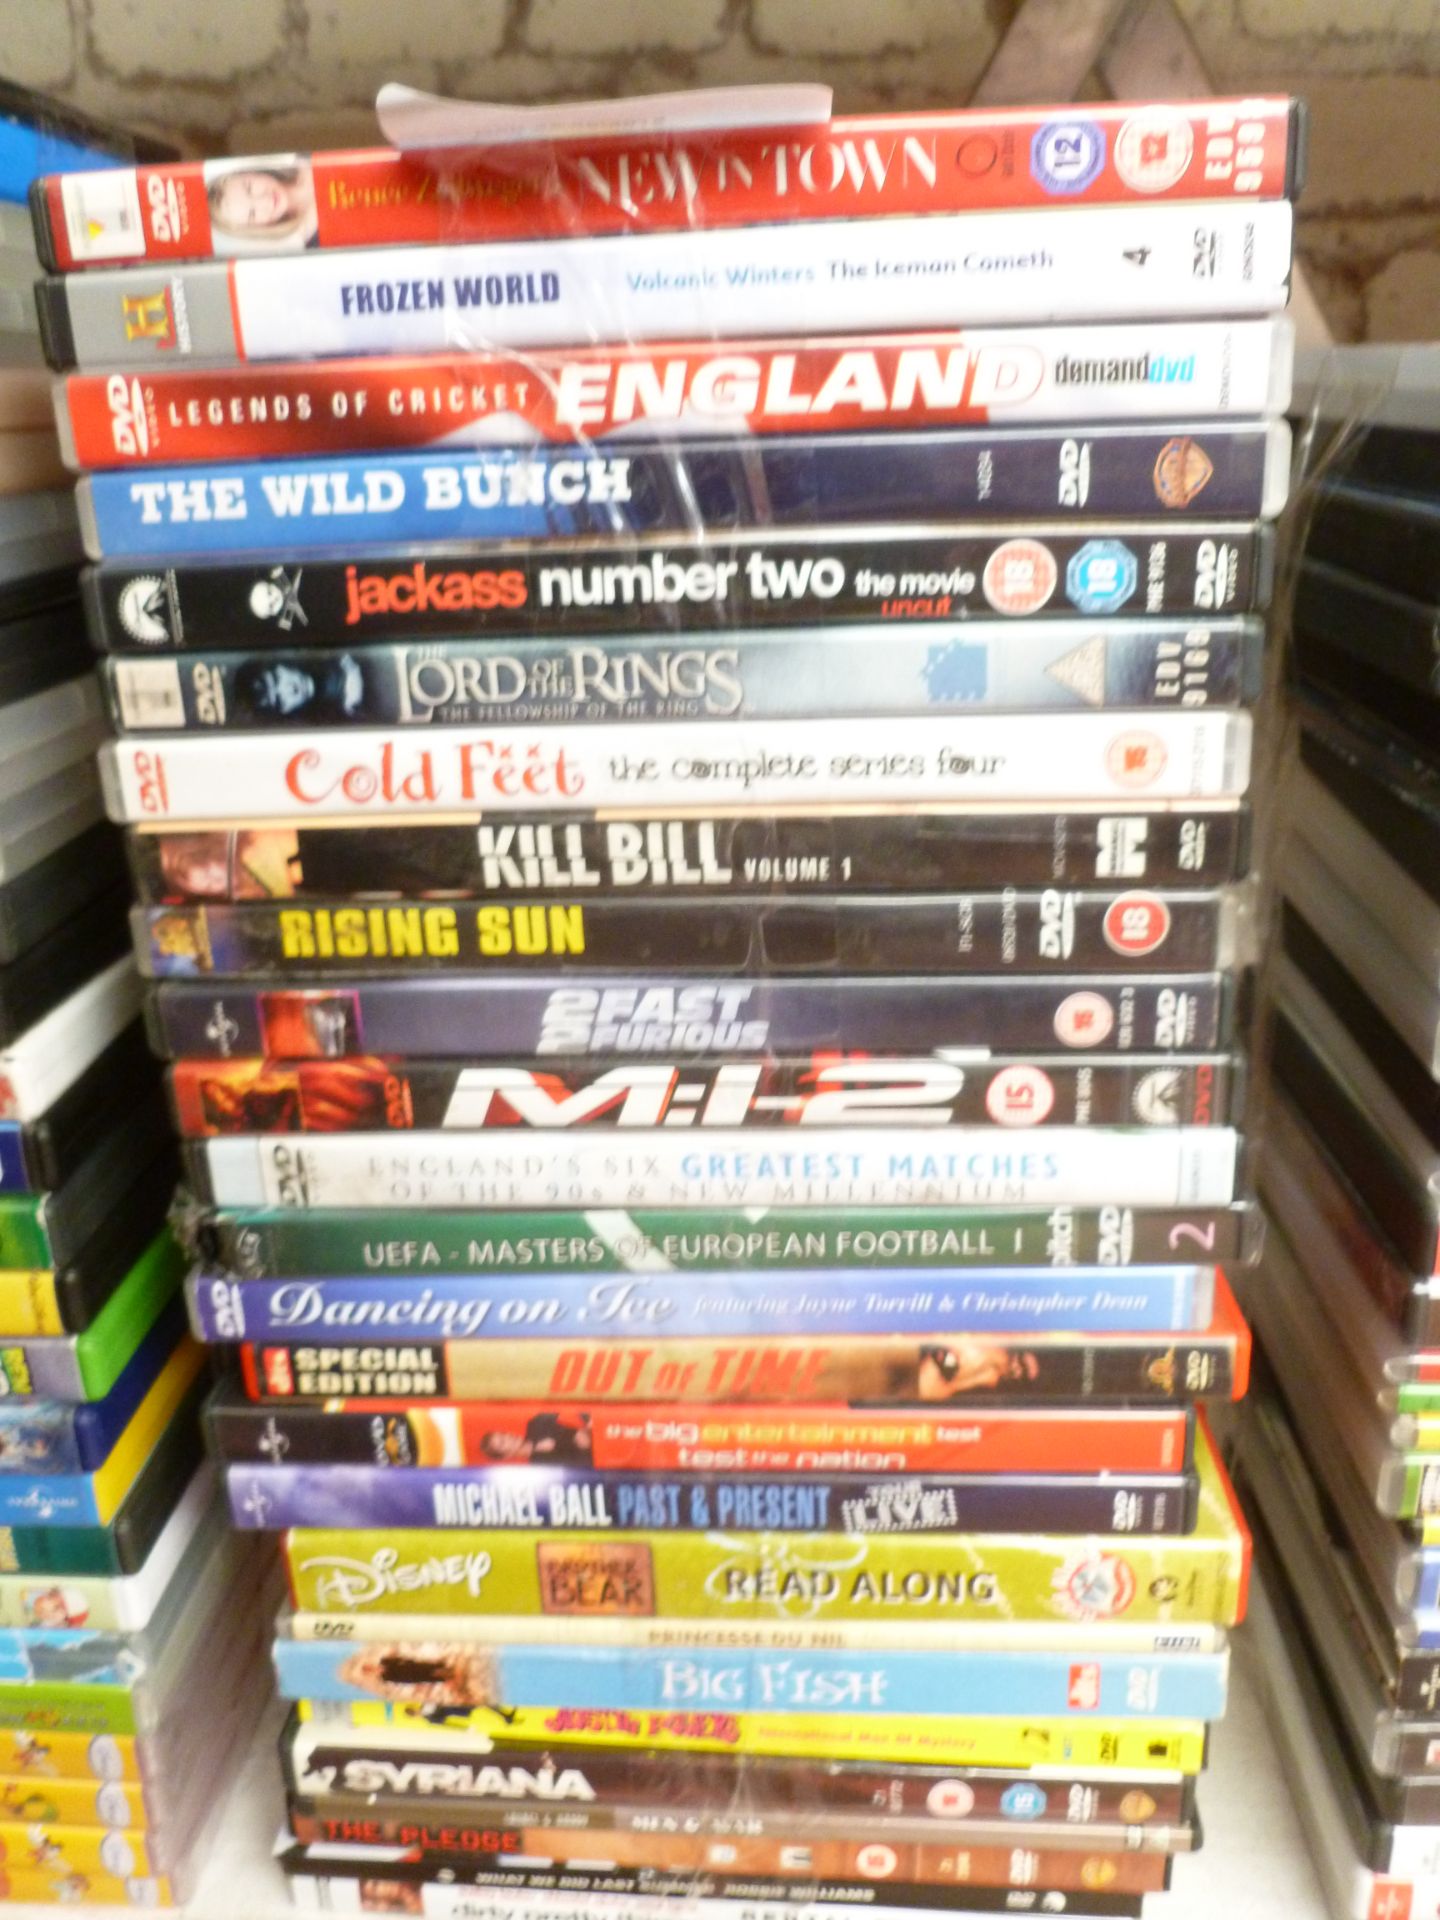 Approximately 25 DVD's, includes Jackass, Lord of the Rings, Rising Sun and more.